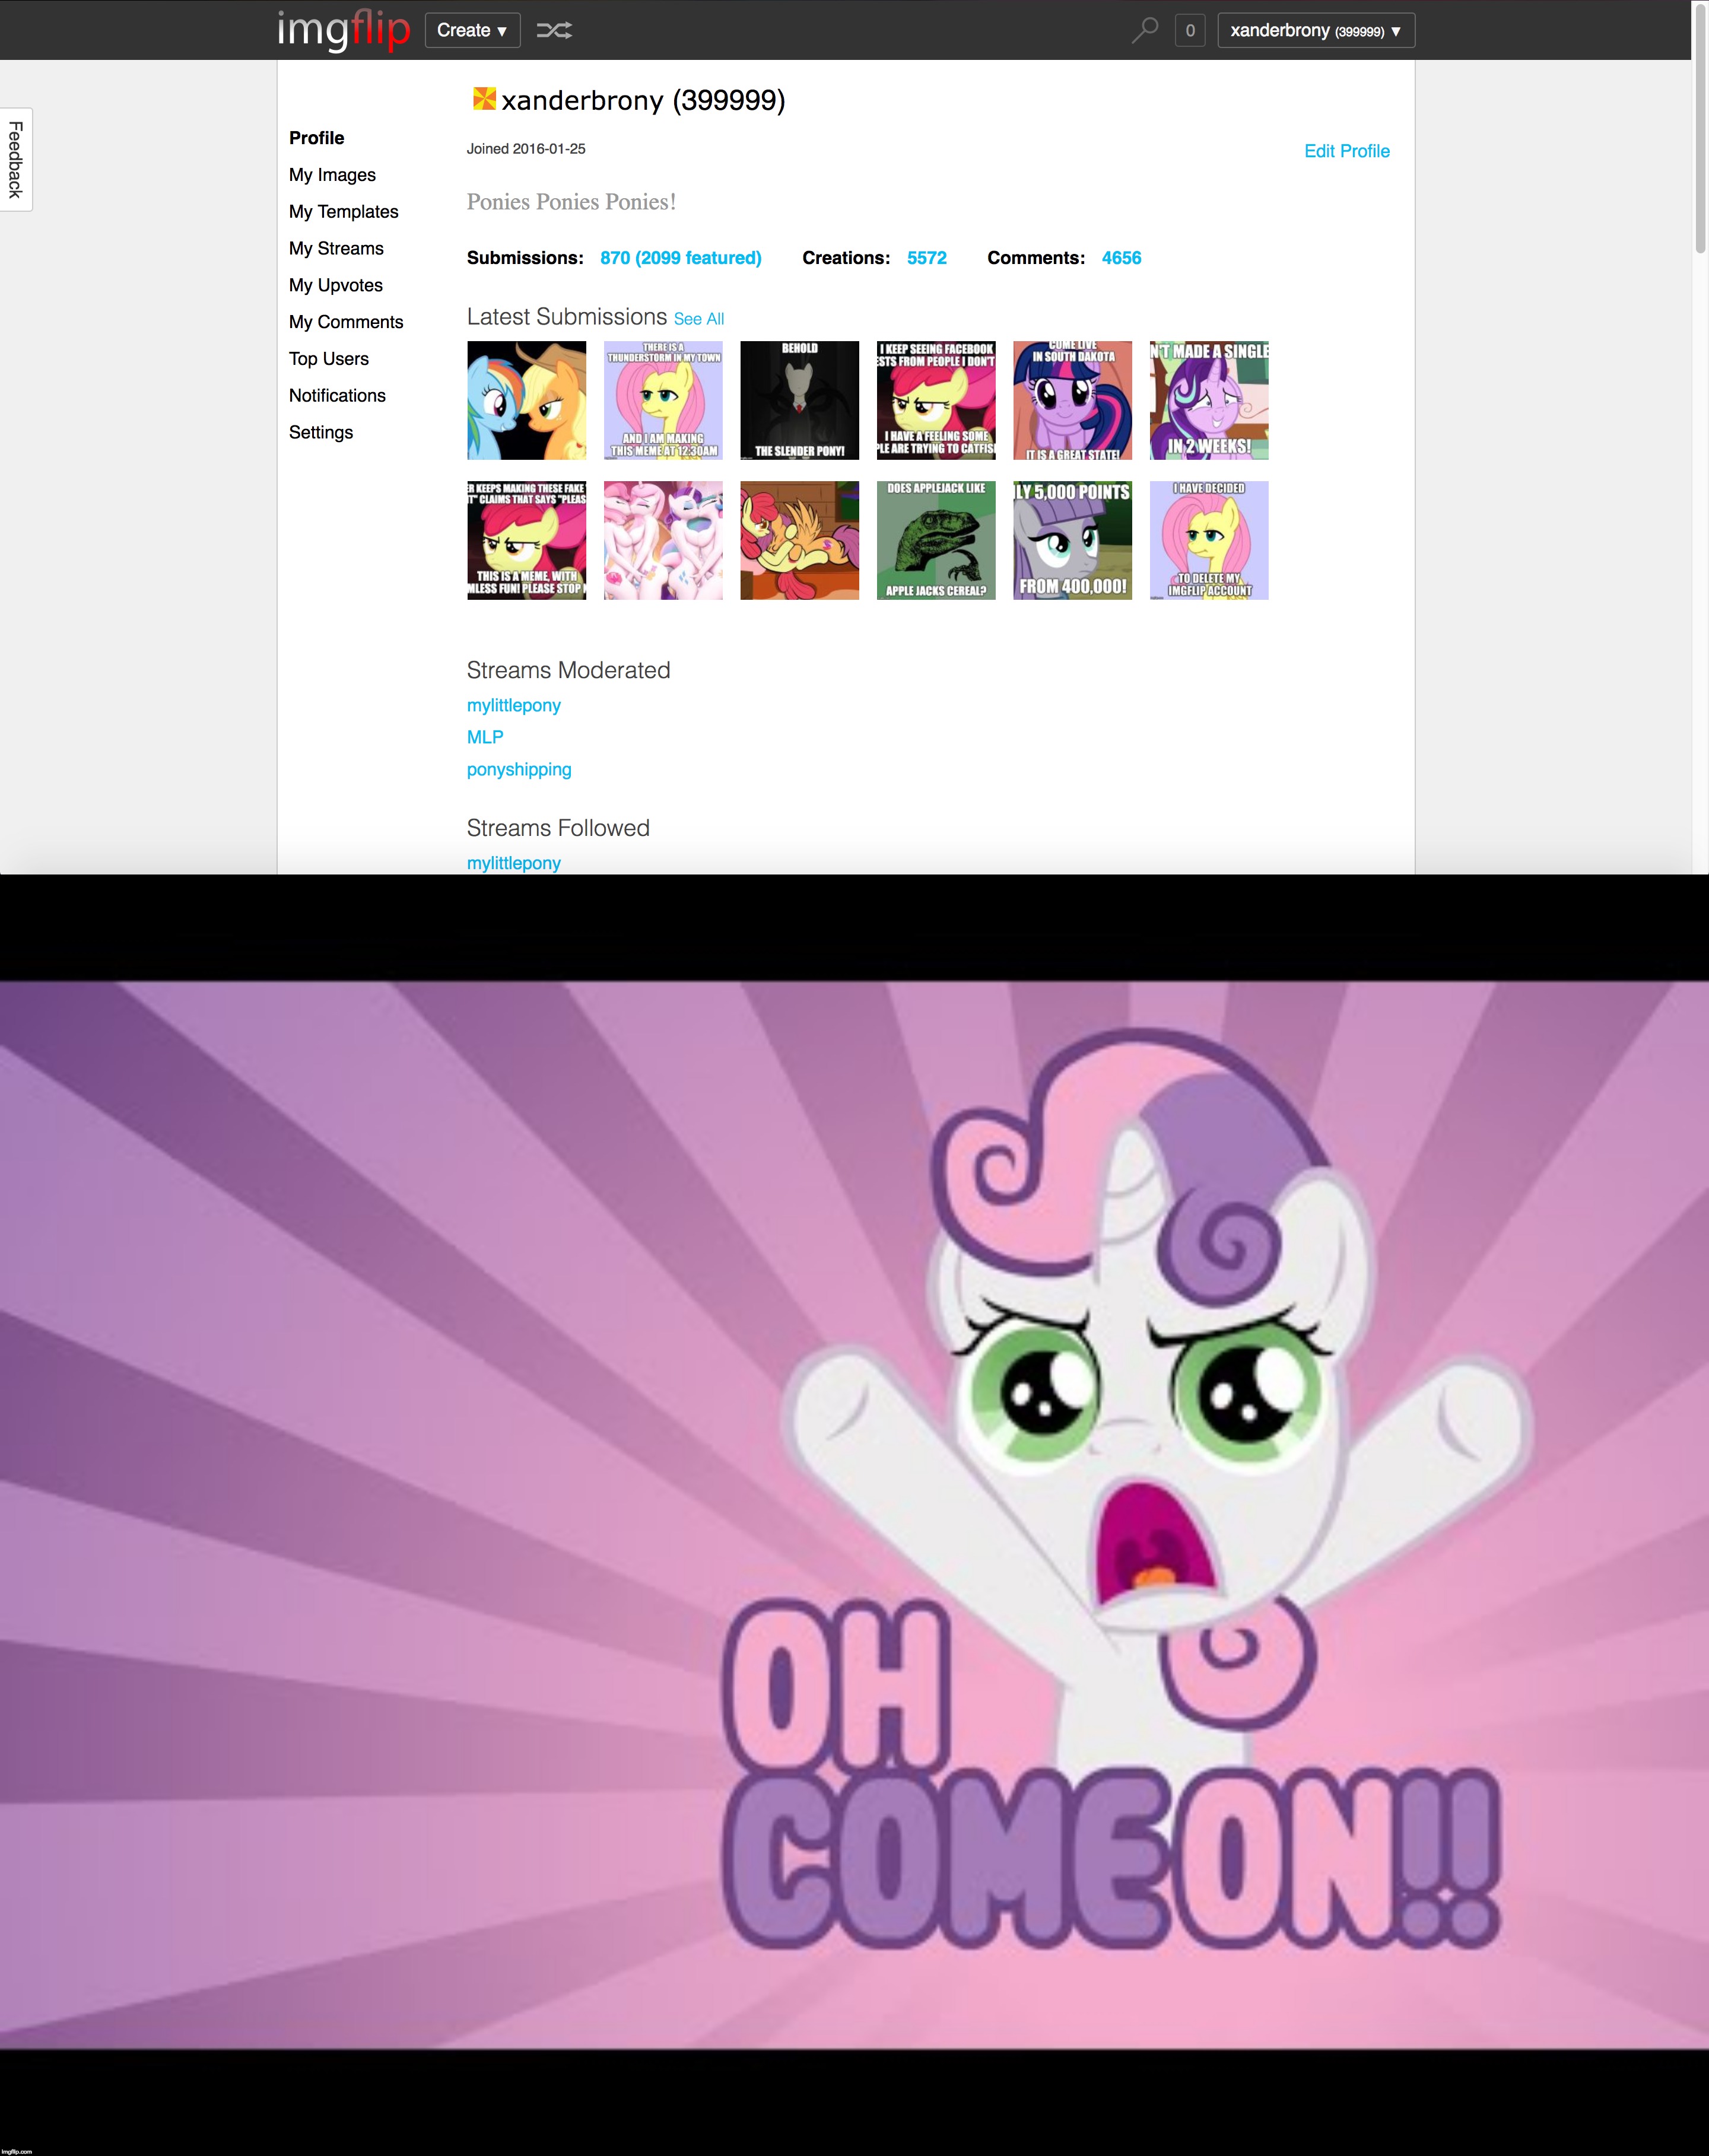 Damn when I get this close! | image tagged in memes,imgflip,points,ponies,xanderbrony | made w/ Imgflip meme maker